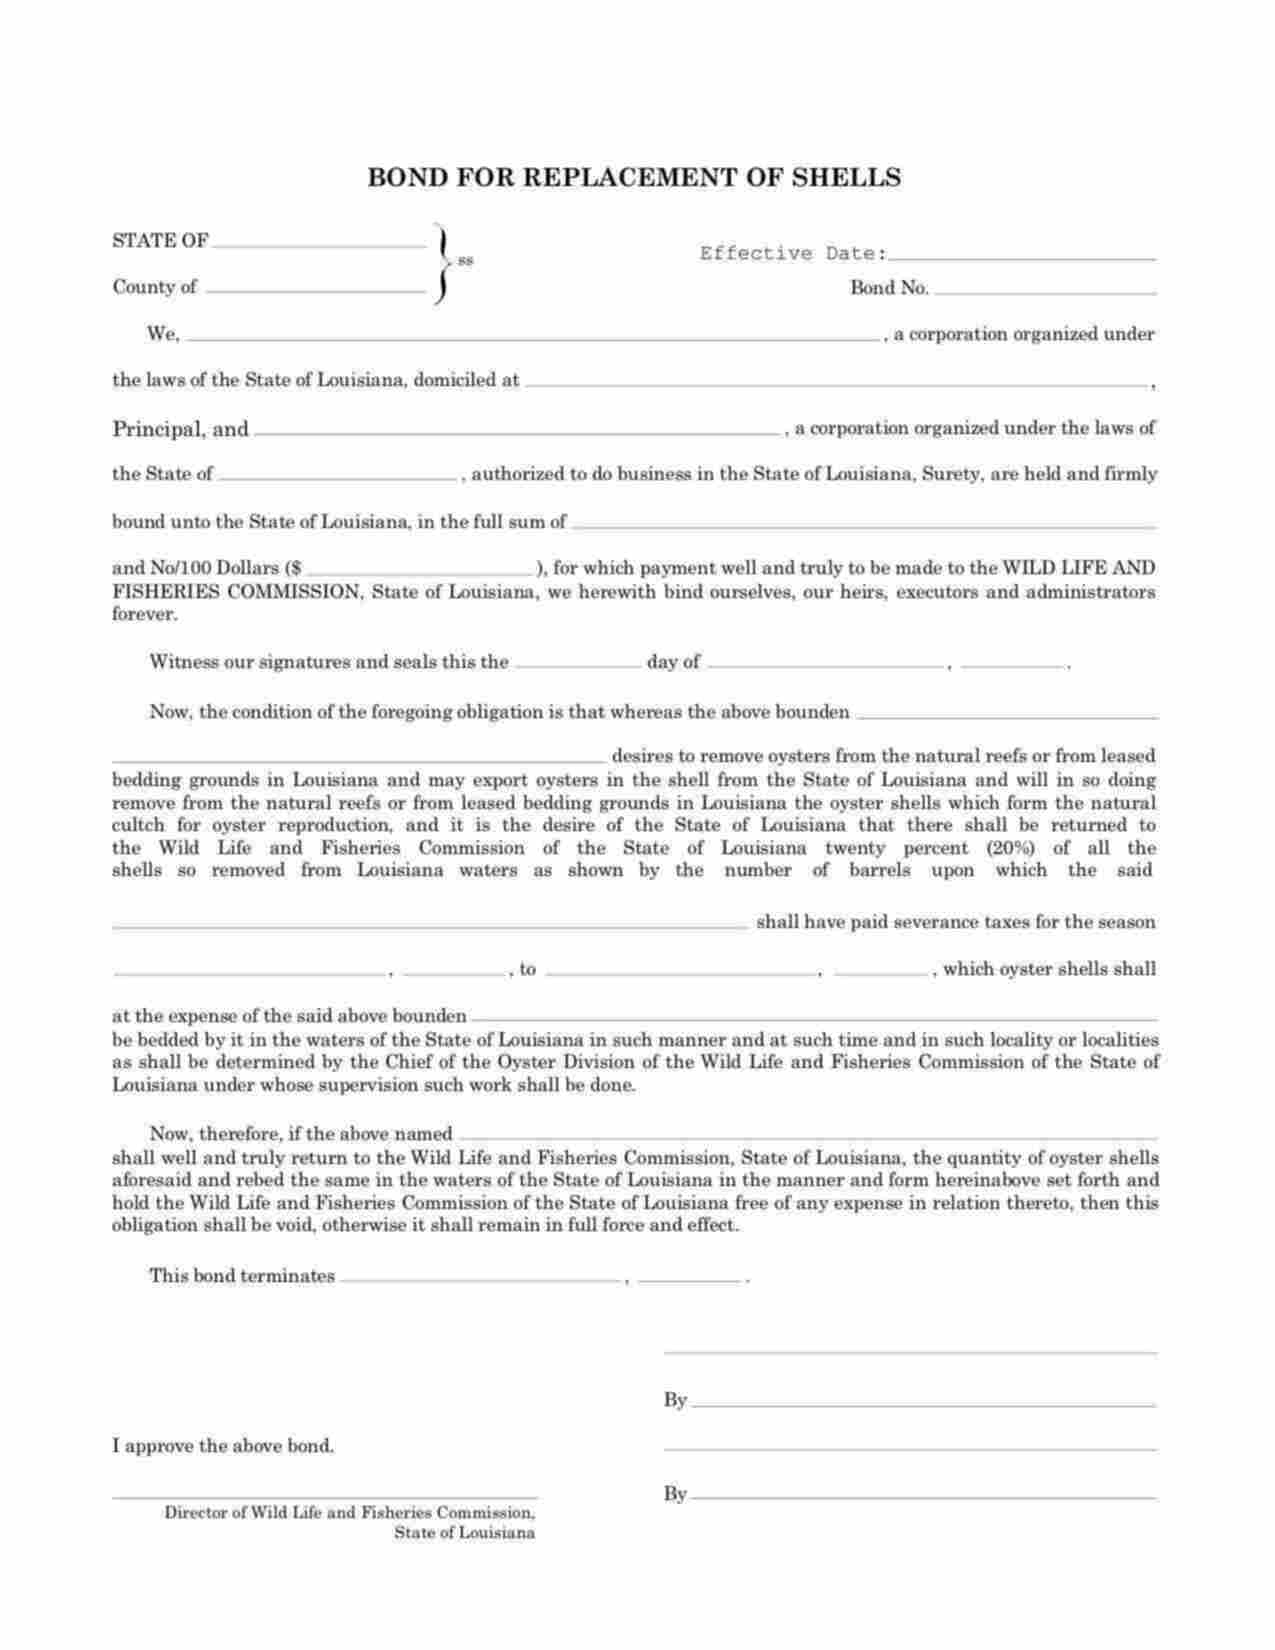 Louisiana Replacement of Oyster Shells Bond Form